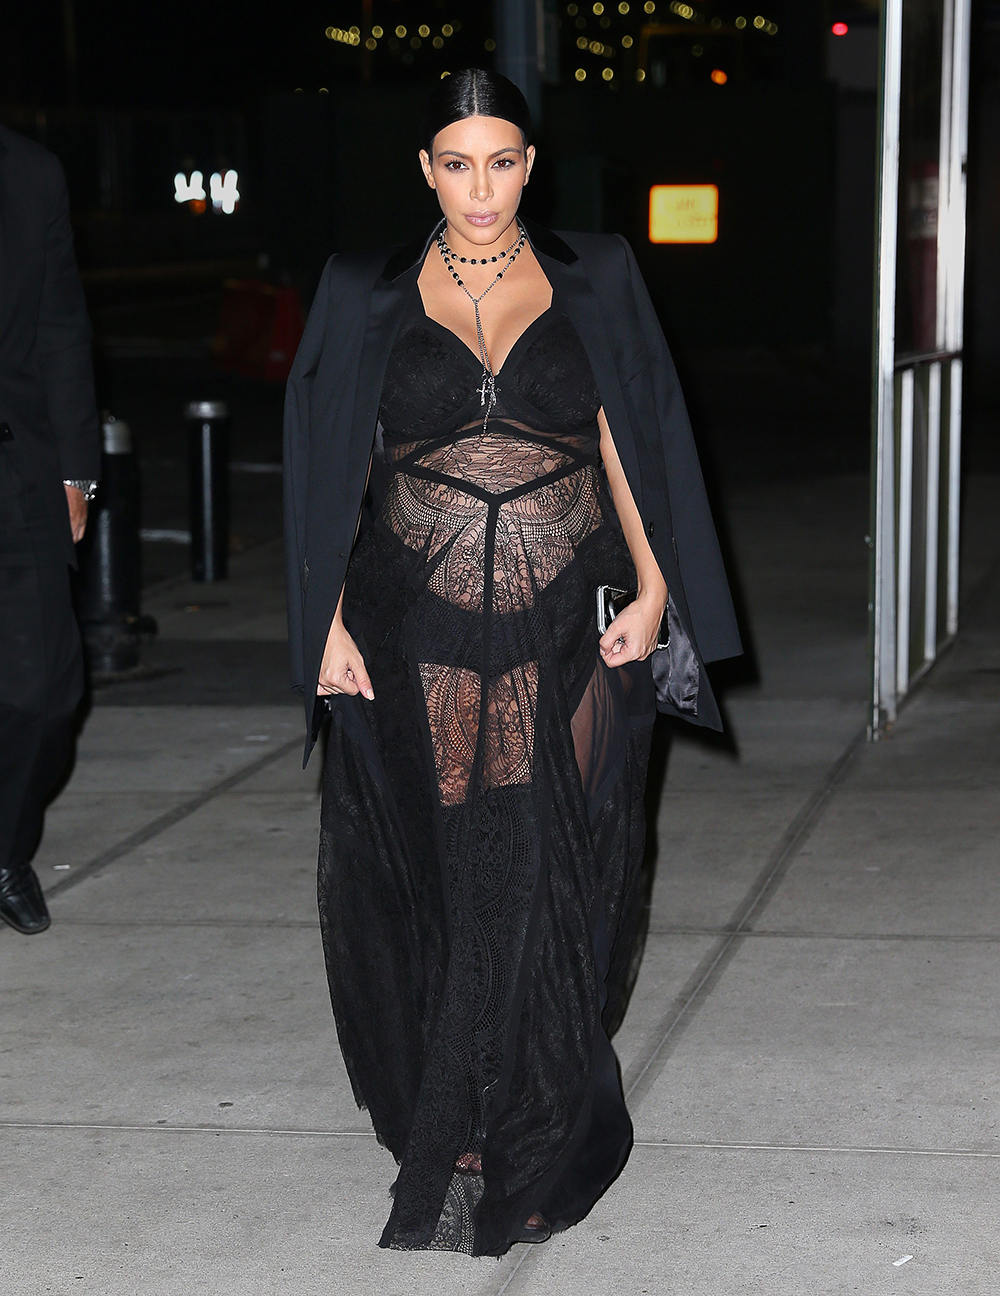 SEPTEMBER 11, 2015: Kim wears lace Givenchy to attend the Spring 2016 show at New York Fashion Week. Photo / Getty Images